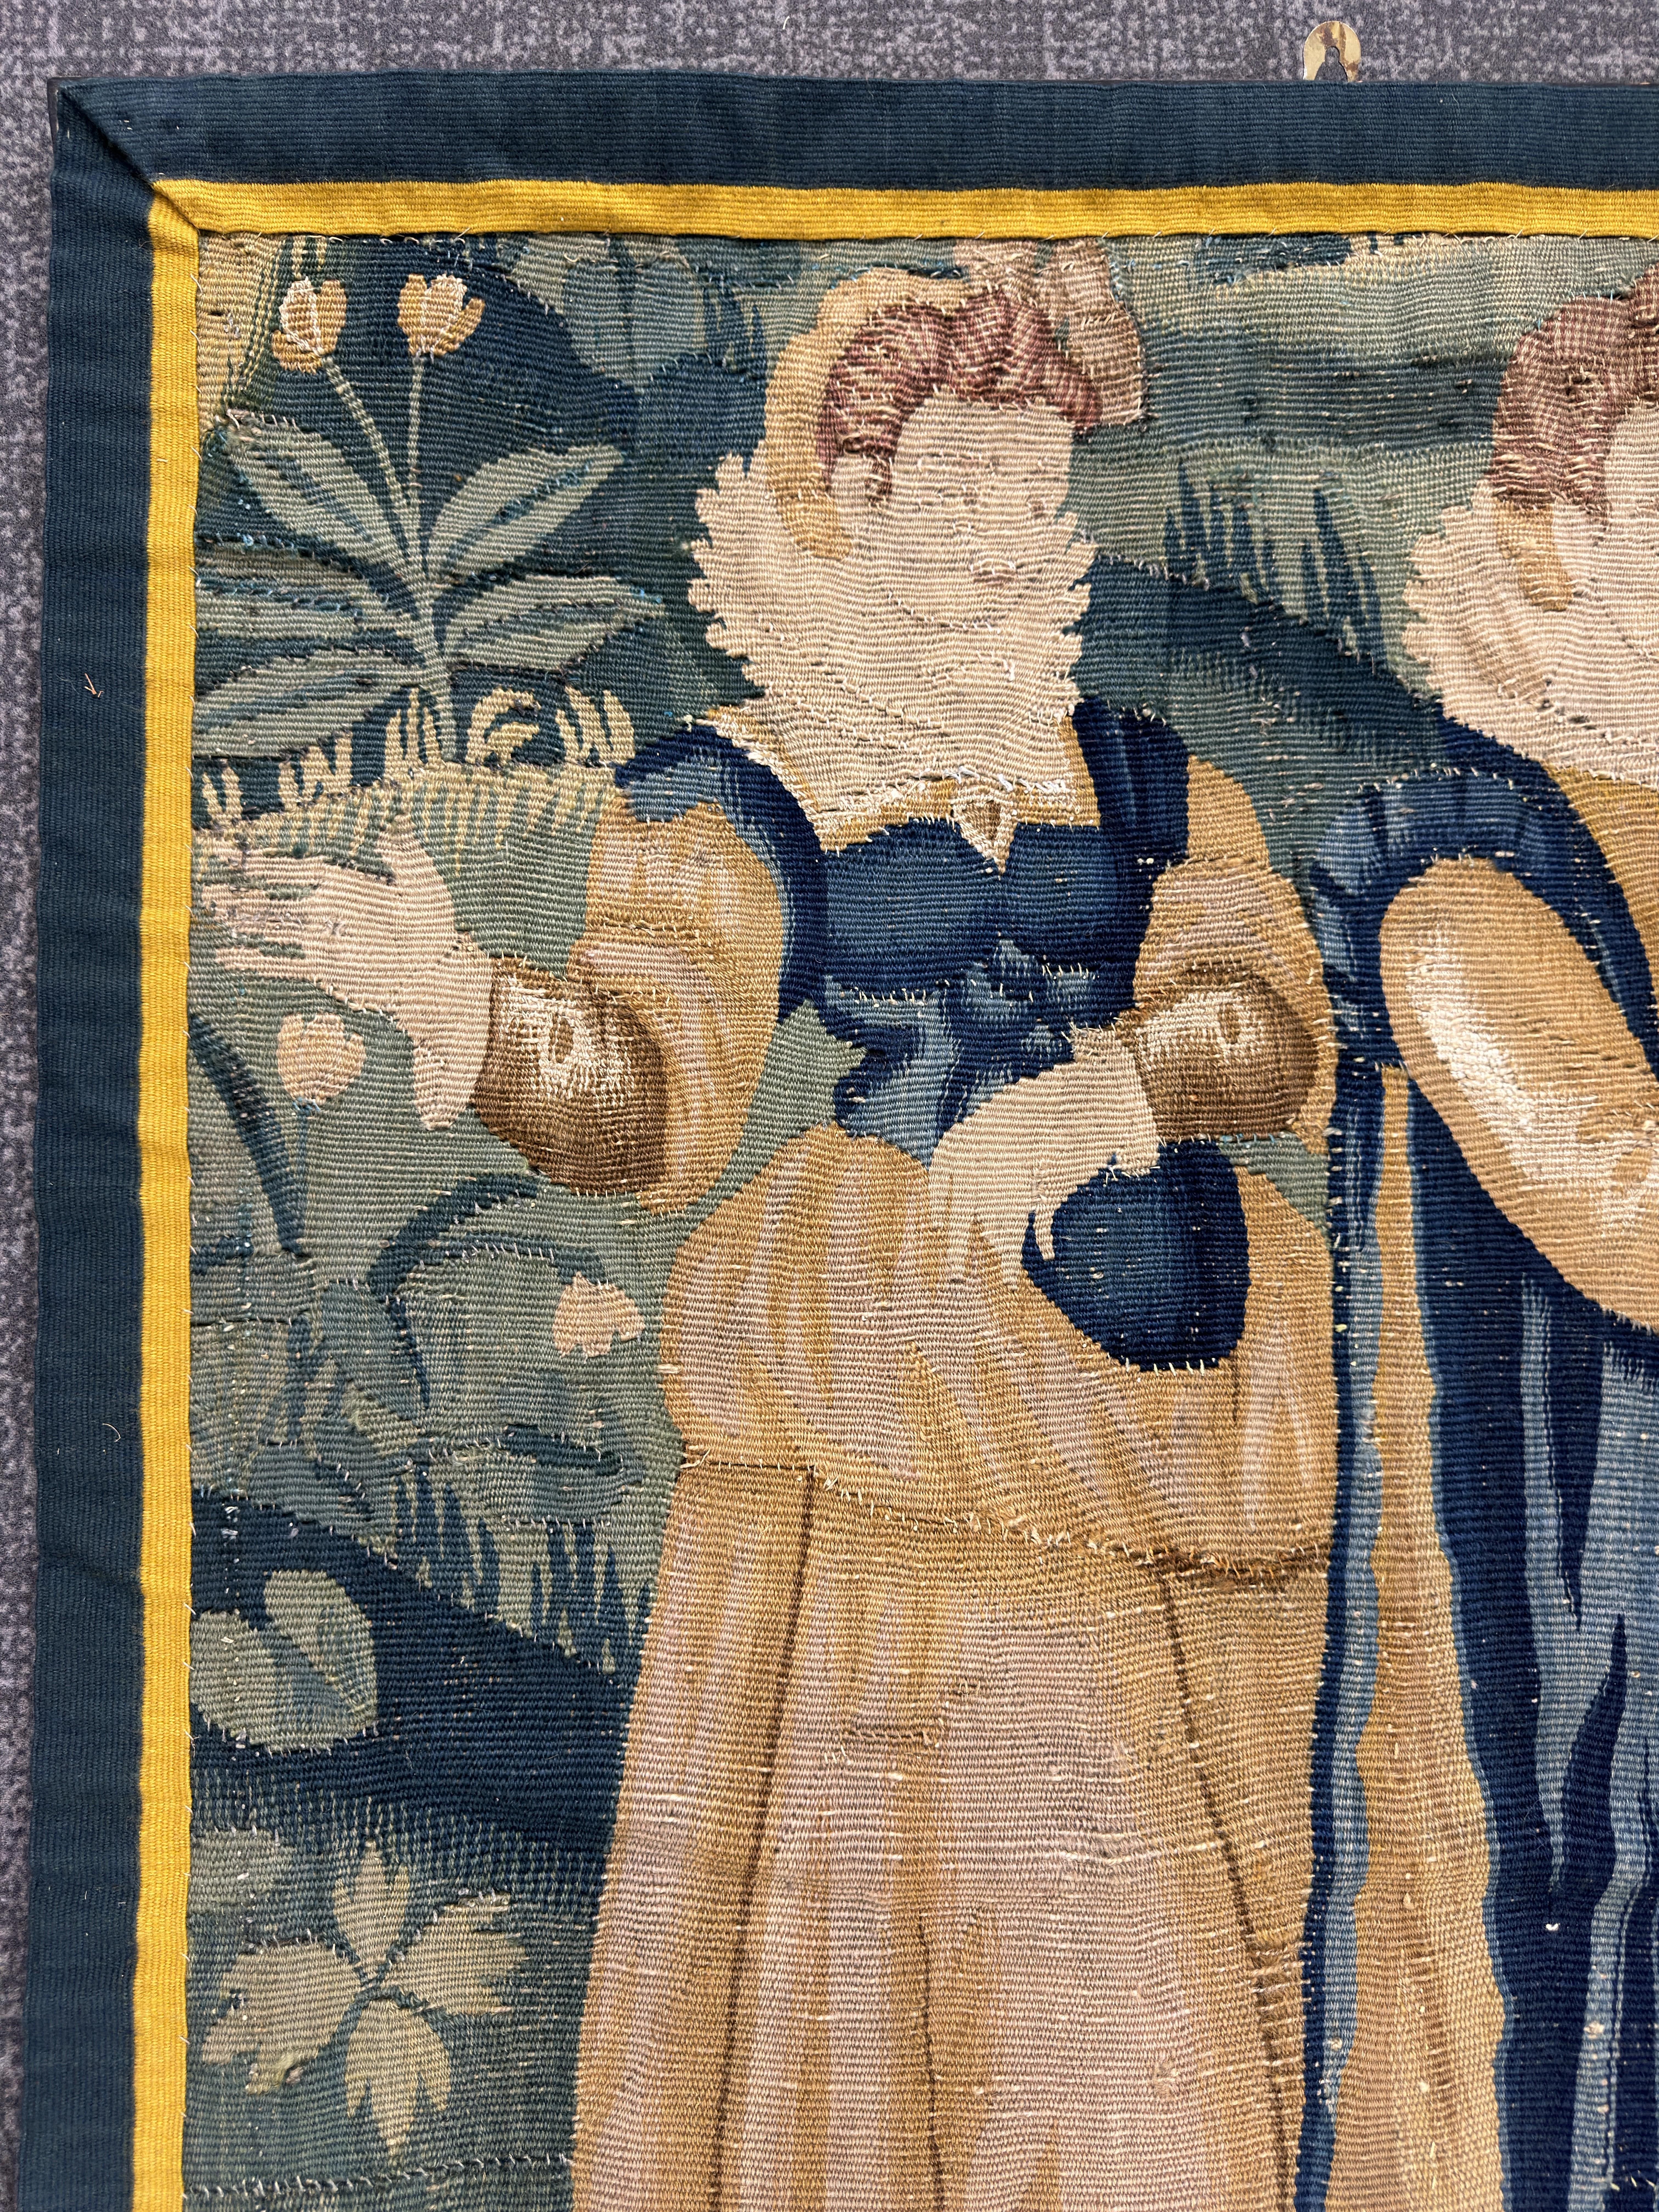 Late 16th/Early 17th Century Tapestry Fragment Wall Hanging depicting two elegantly dressed female courtiers in a garden landscape, edged in a later ochre and blue border band.